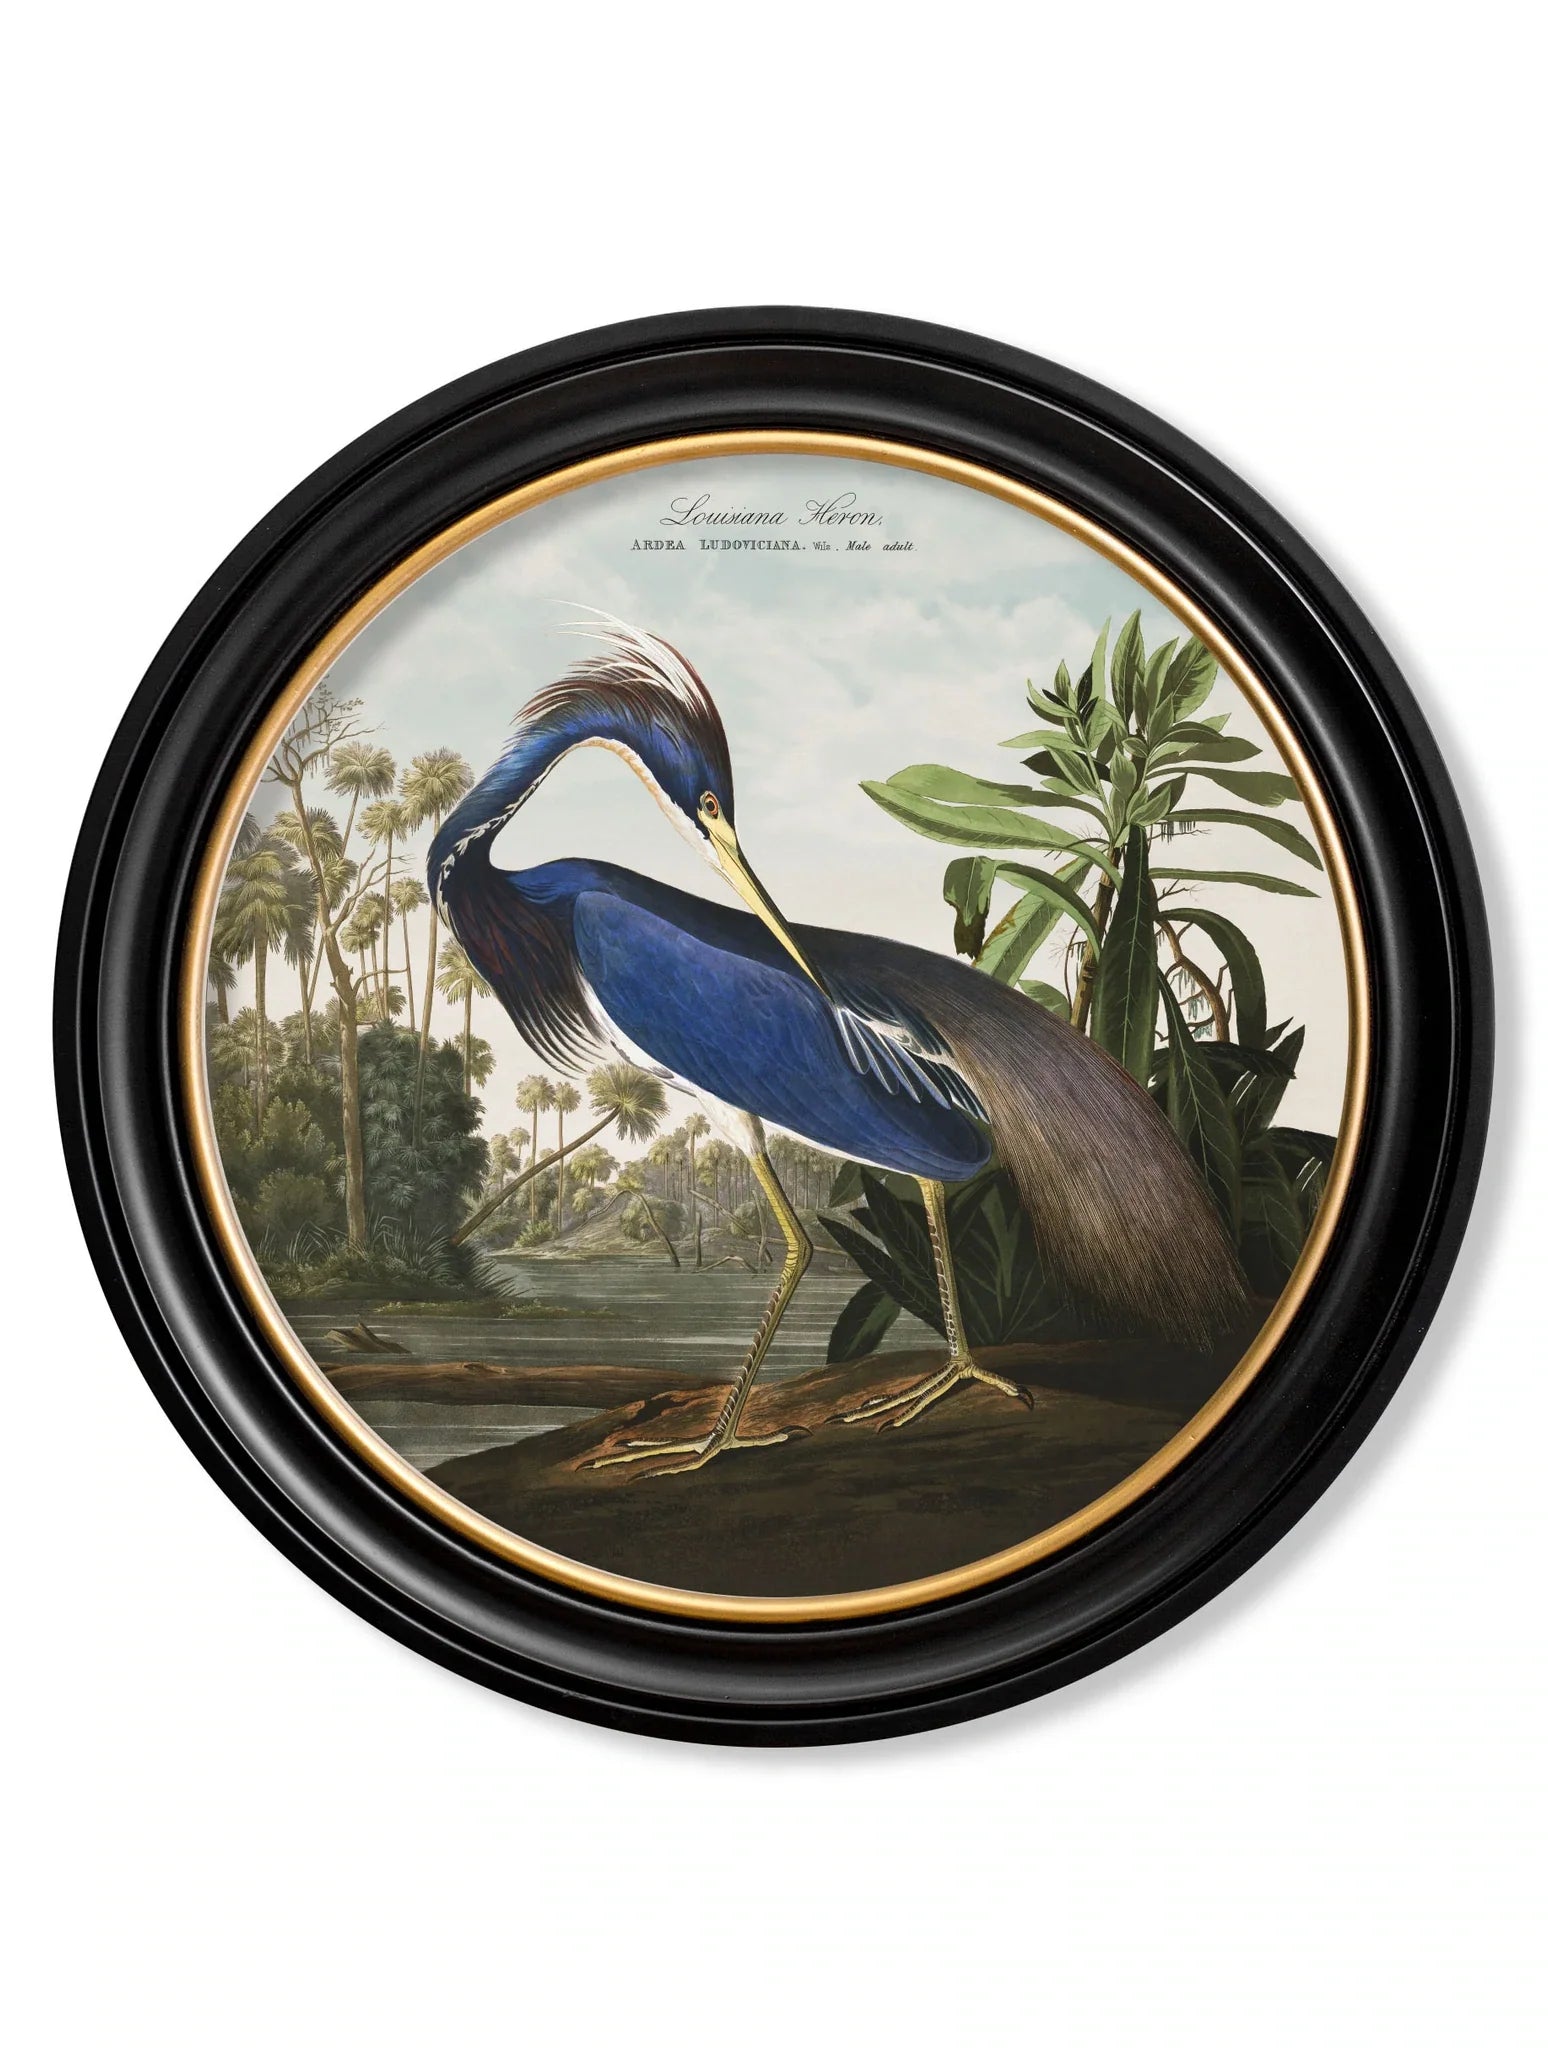 C.1838 Audubon's Herons in Round Frames for sale - Woodcock and Cavendish